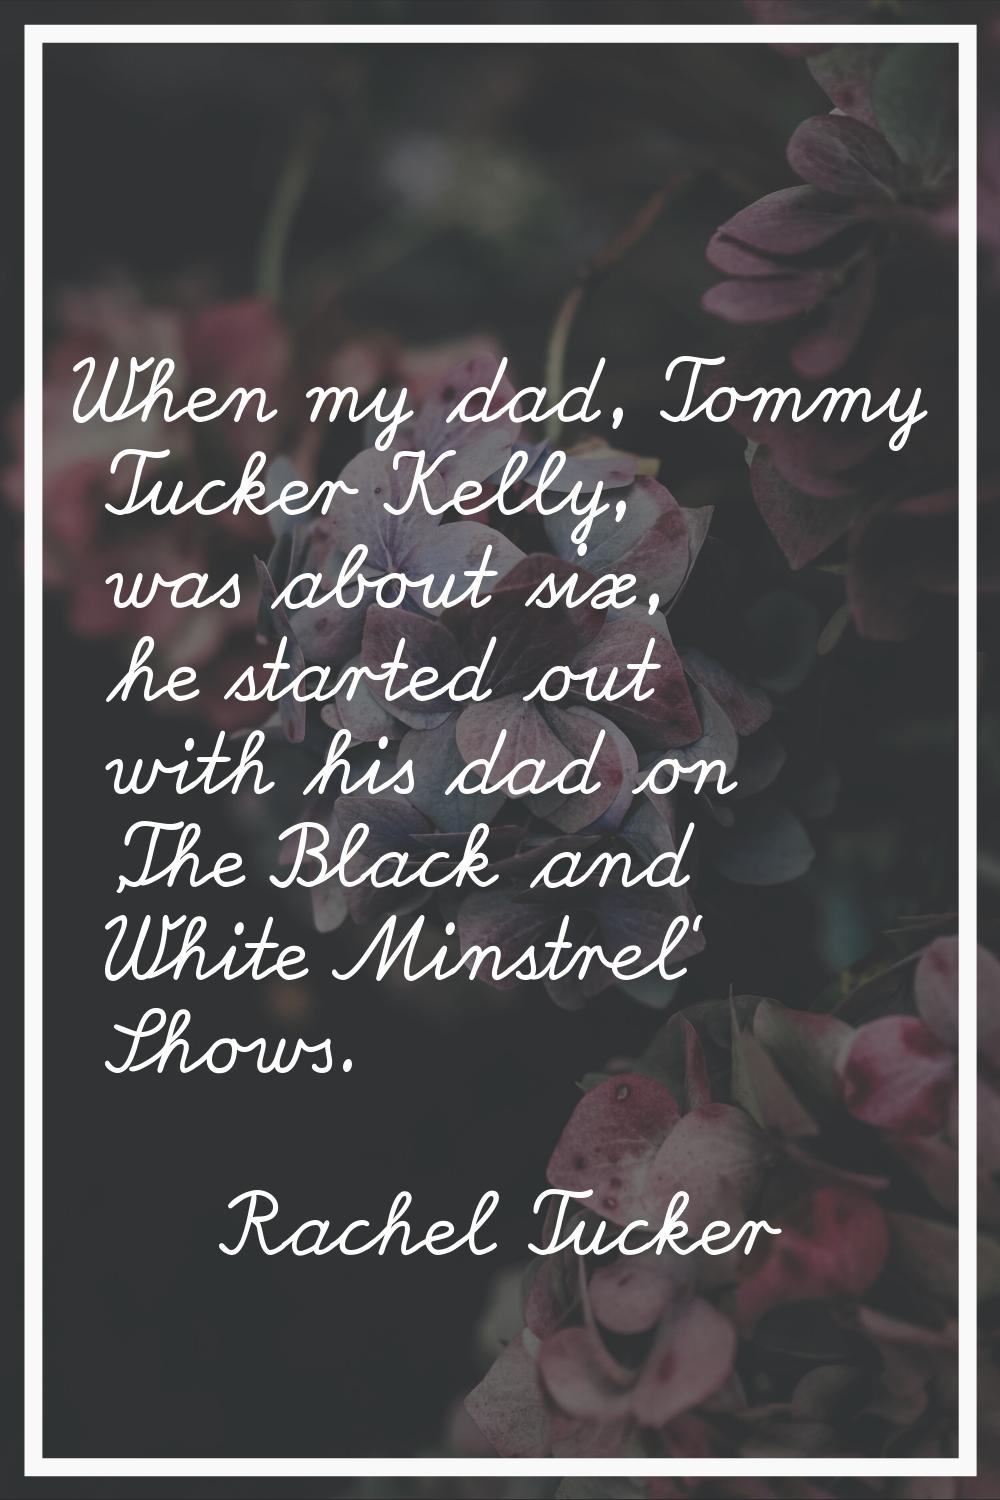 When my dad, Tommy Tucker Kelly, was about six, he started out with his dad on 'The Black and White